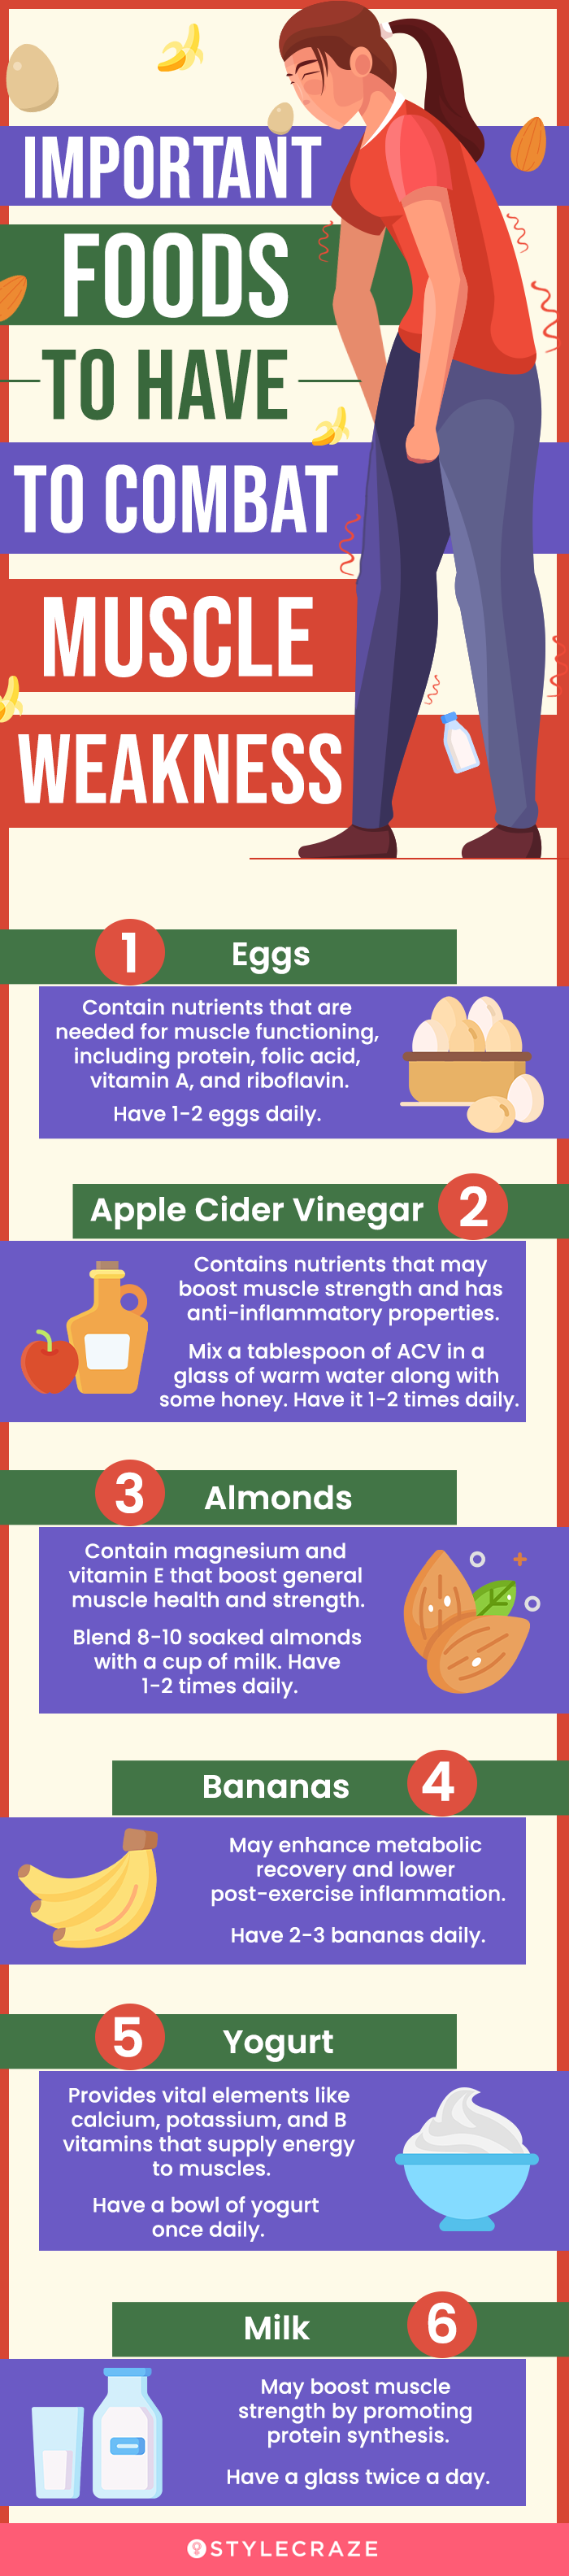 important foods to have to combat muscle weakness (infographic)